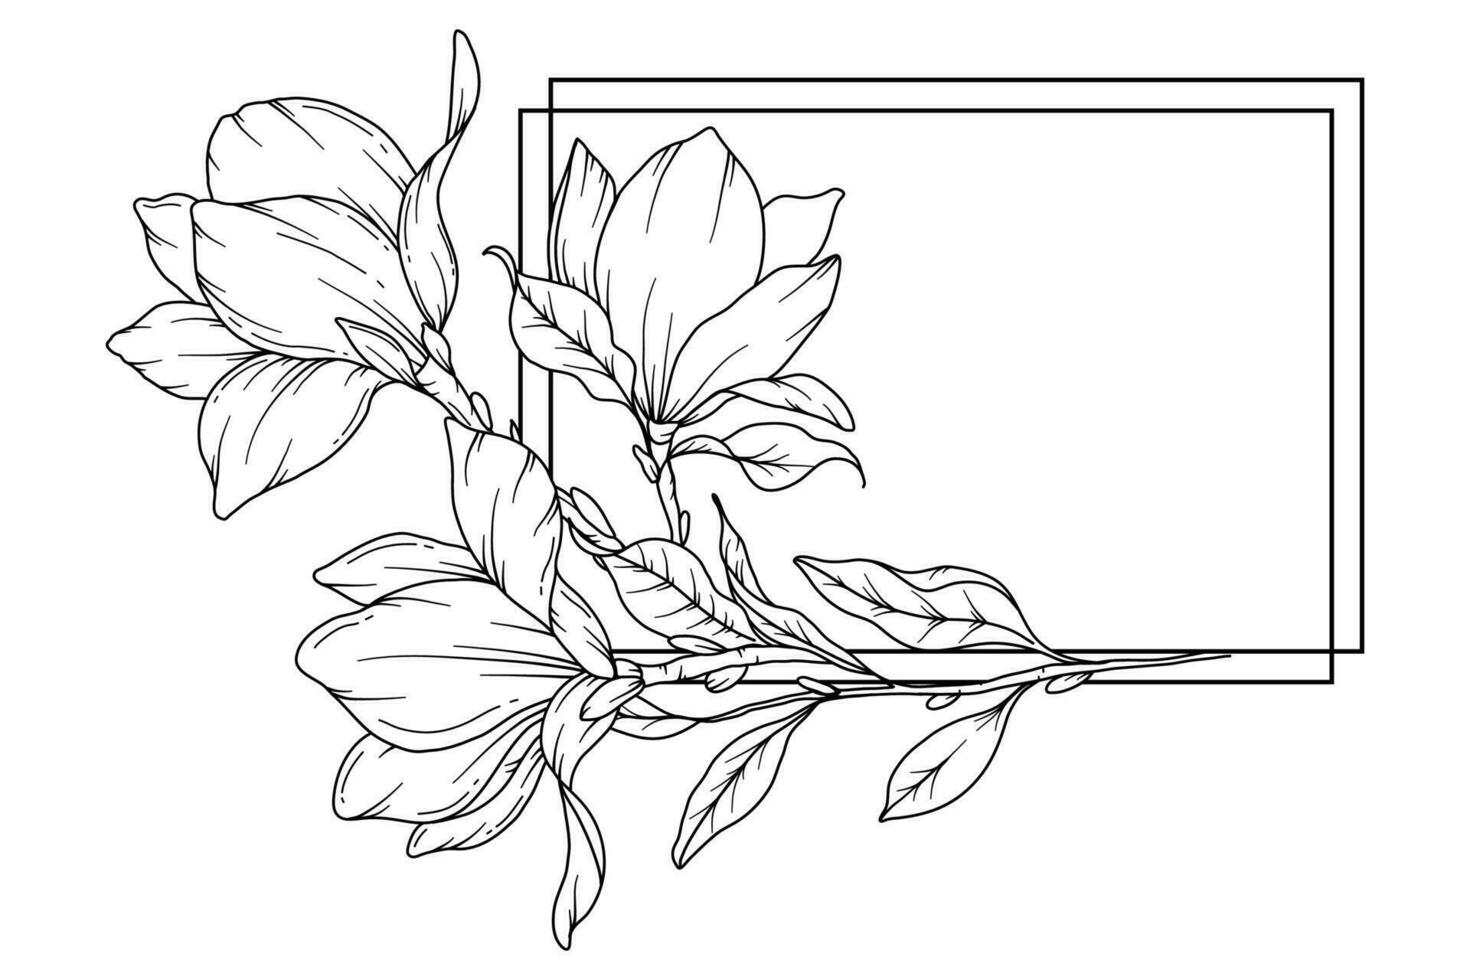 Magnolia Line Drawing. Black and white Floral Frames. Floral Line Art. Fine Line Magnolia illustration. Hand Drawn Outline flowers. Botanical Coloring Page. Wedding invitation flowers vector